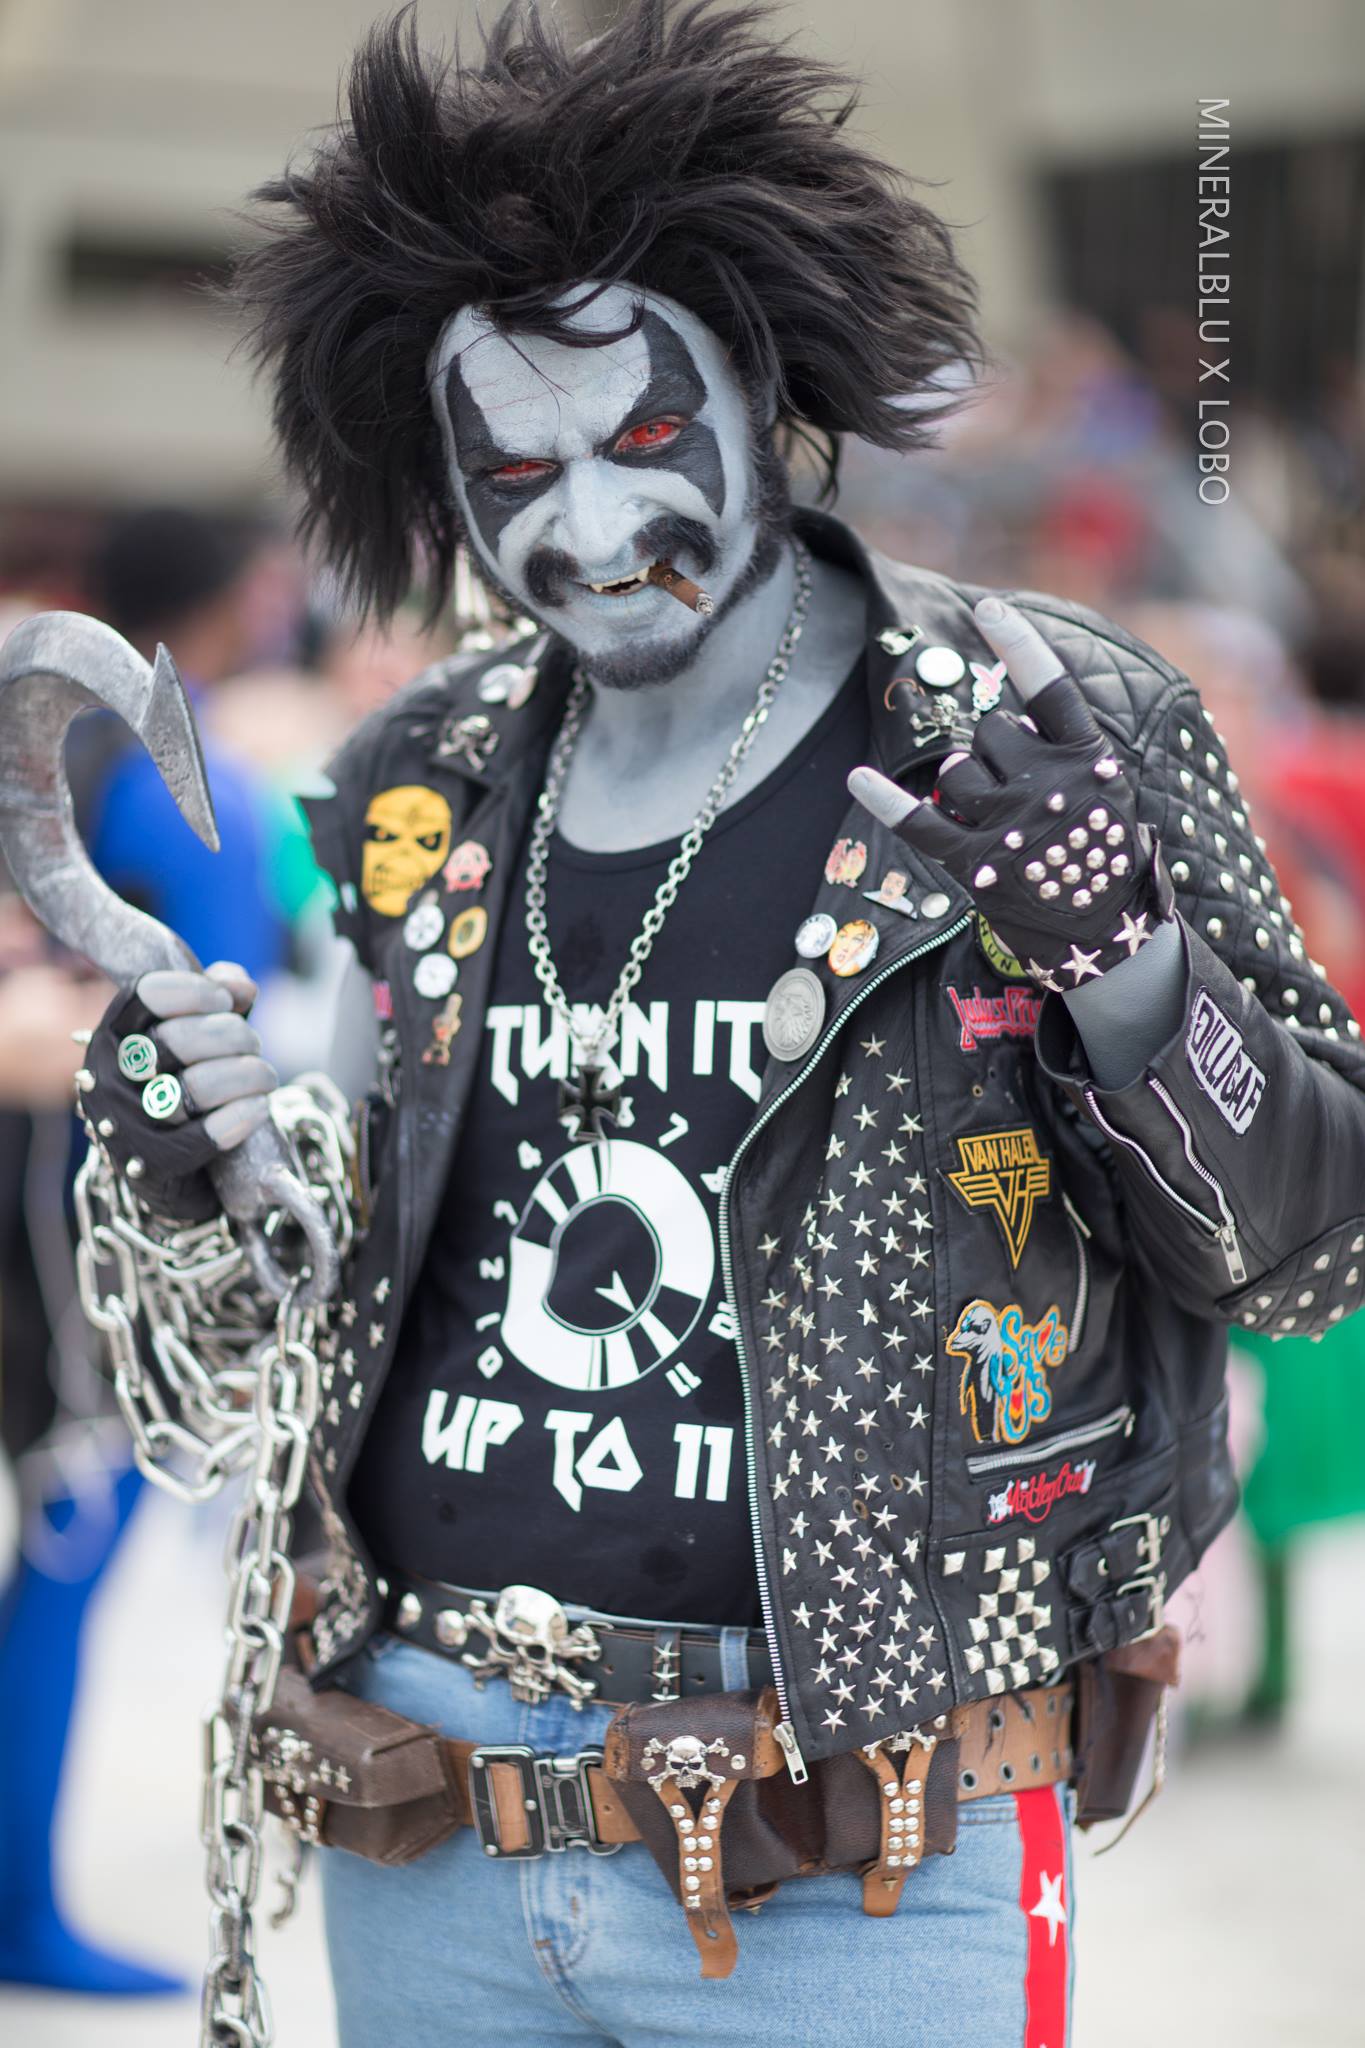 The Best Cosplay From Dragon Con